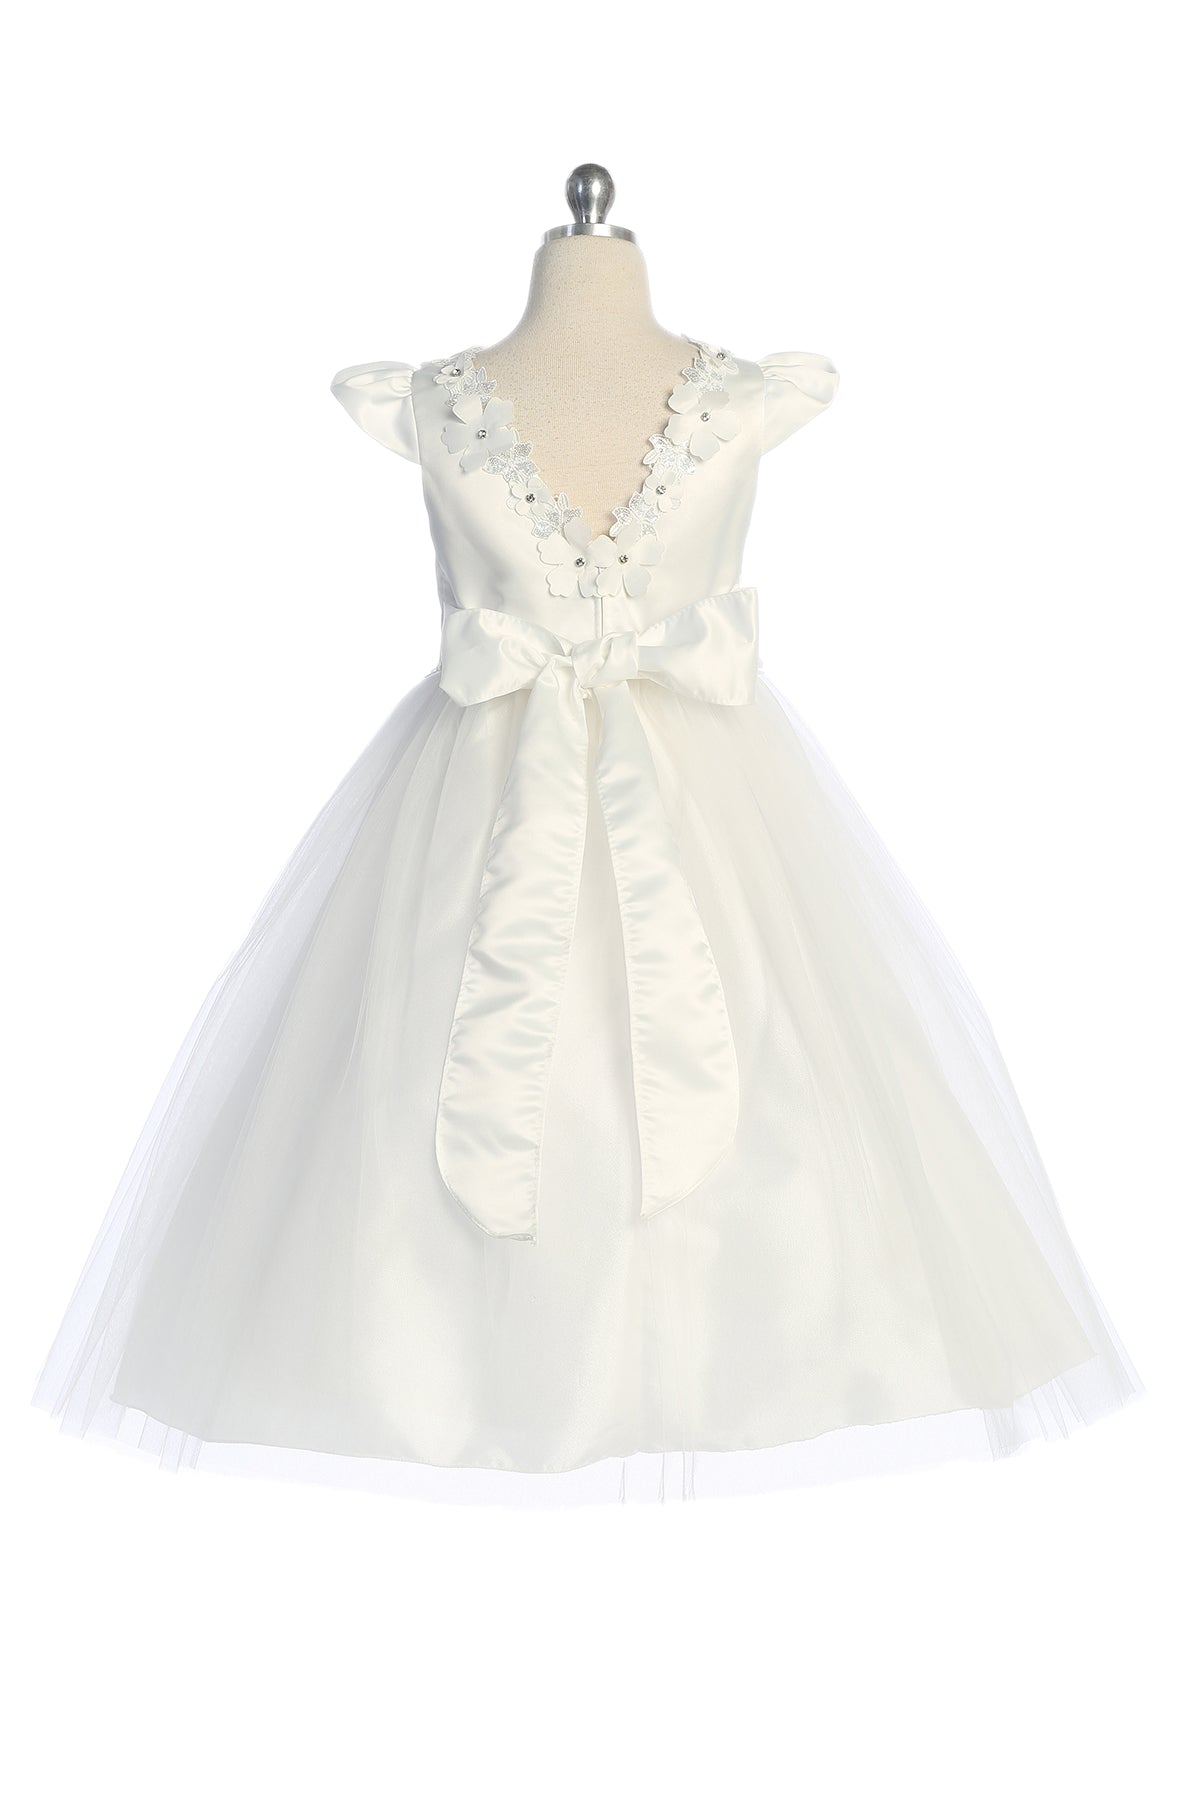 562 Capped Sleeve Satin & Tulle Girls Dress with Floral Trim and Plus ...